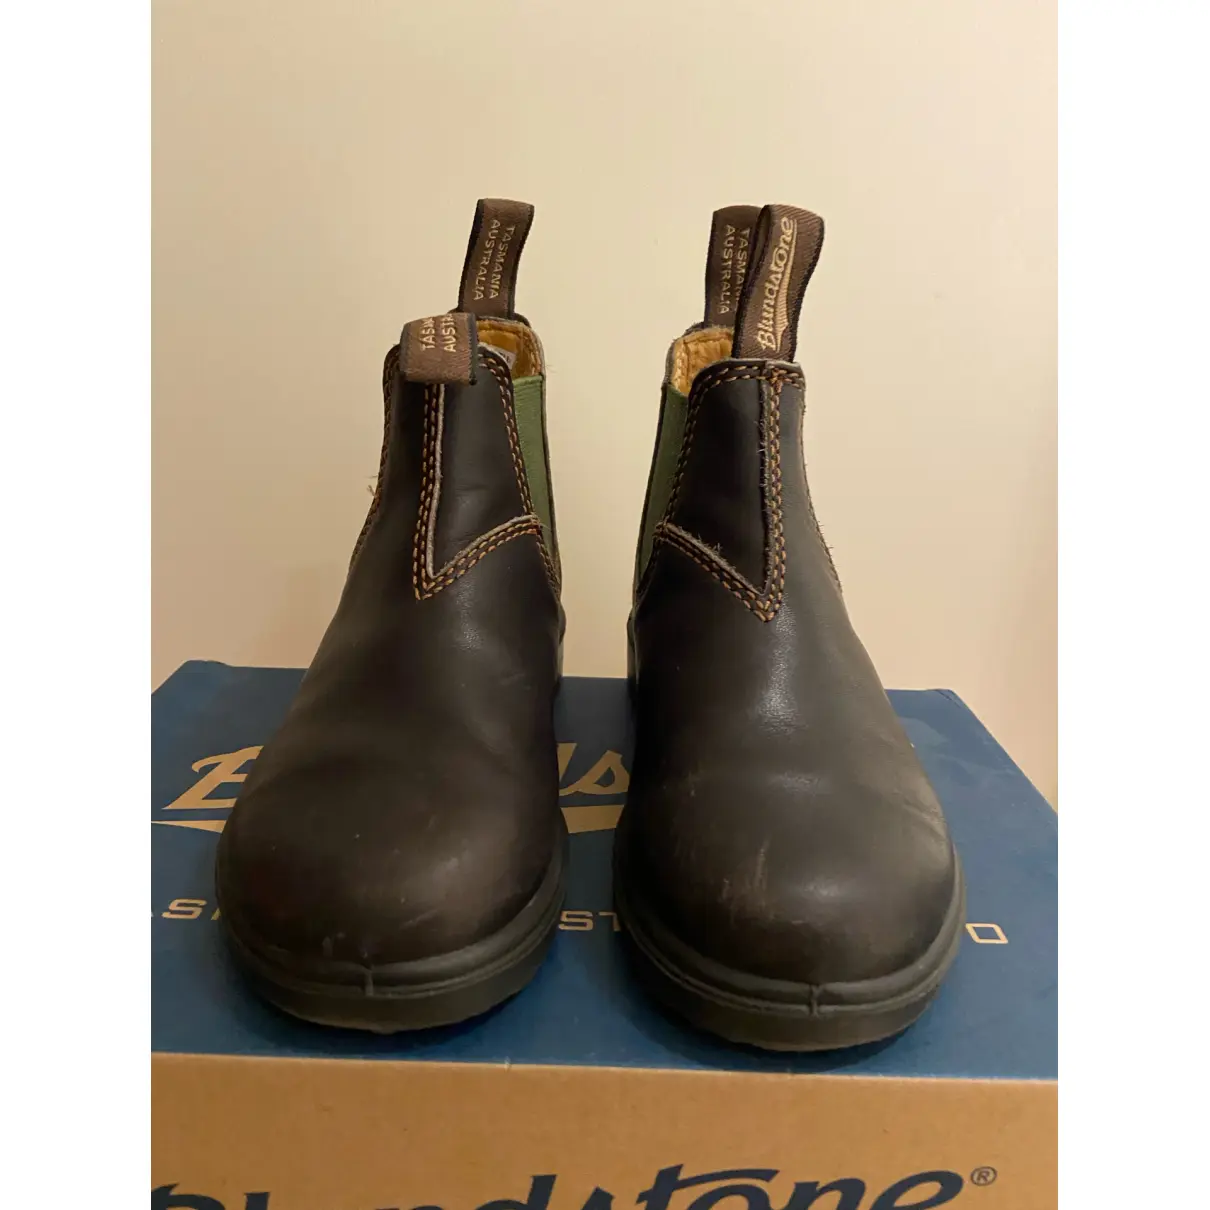 Buy Blundstone Leather boots online